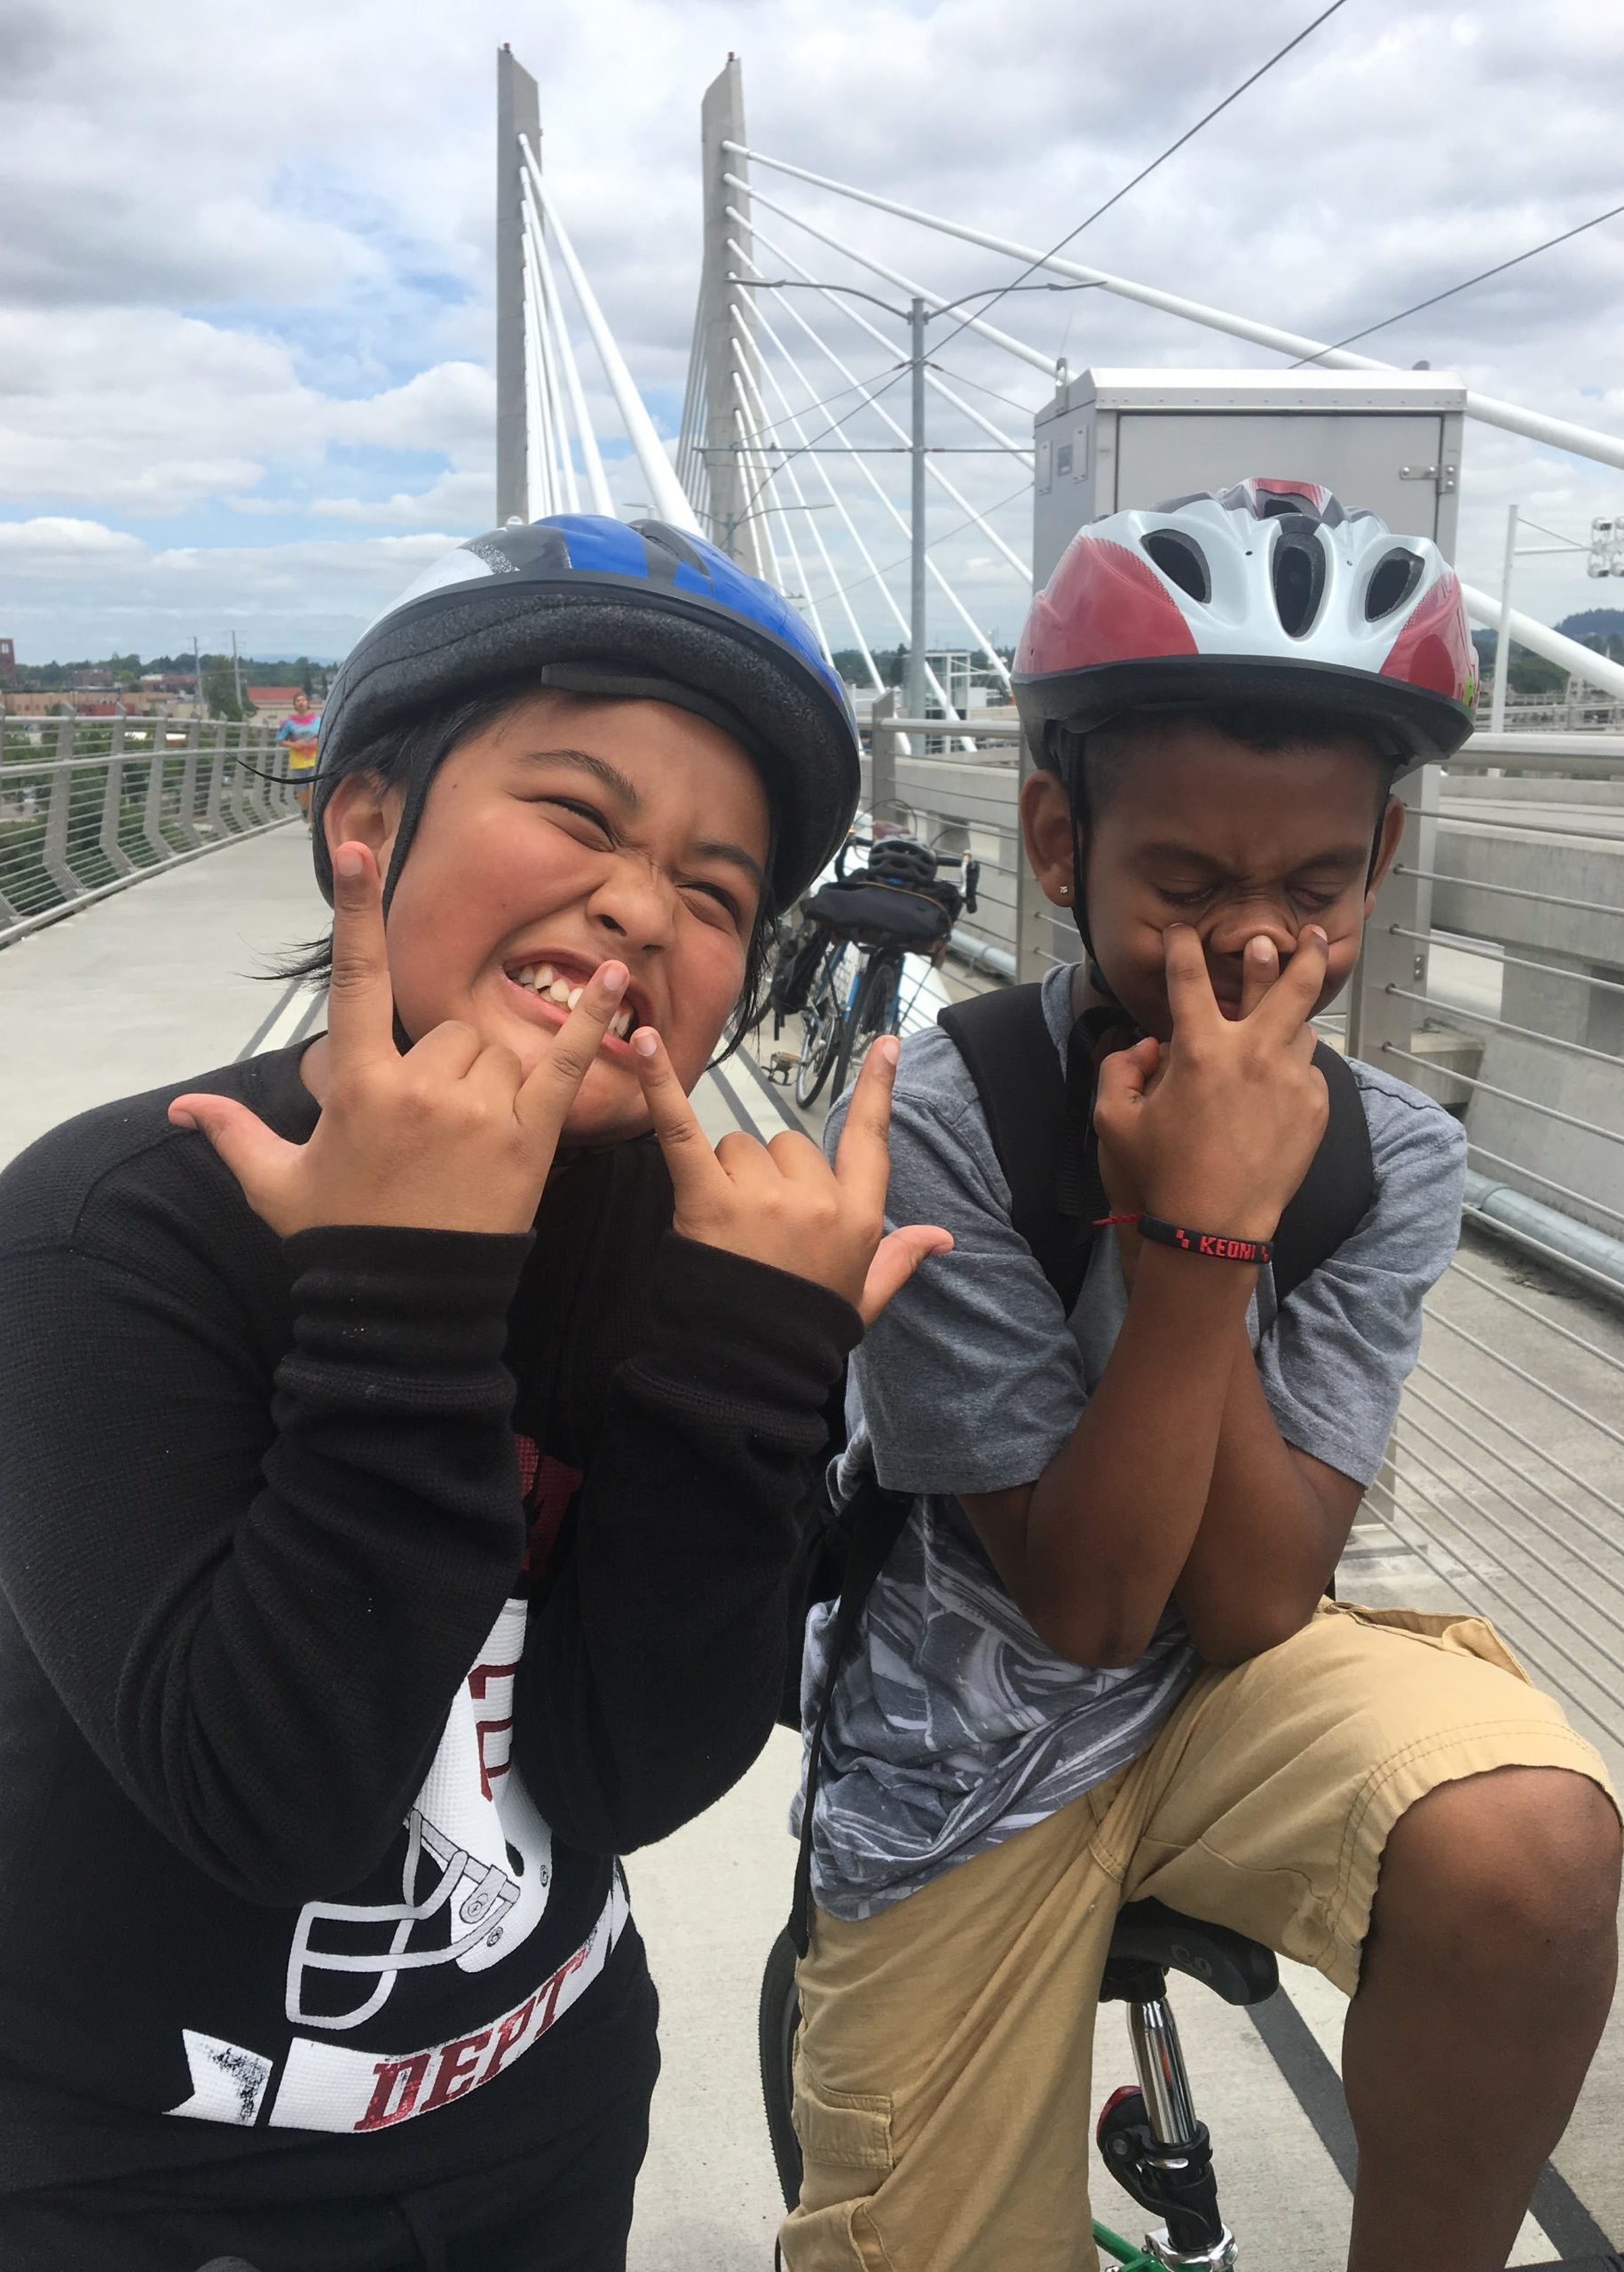 Two children stand on the Tillikum Bridge. They both wear bike helmets. One child is making an enthusiastic smile, squinting their eyes and holding up rock and roll hands.